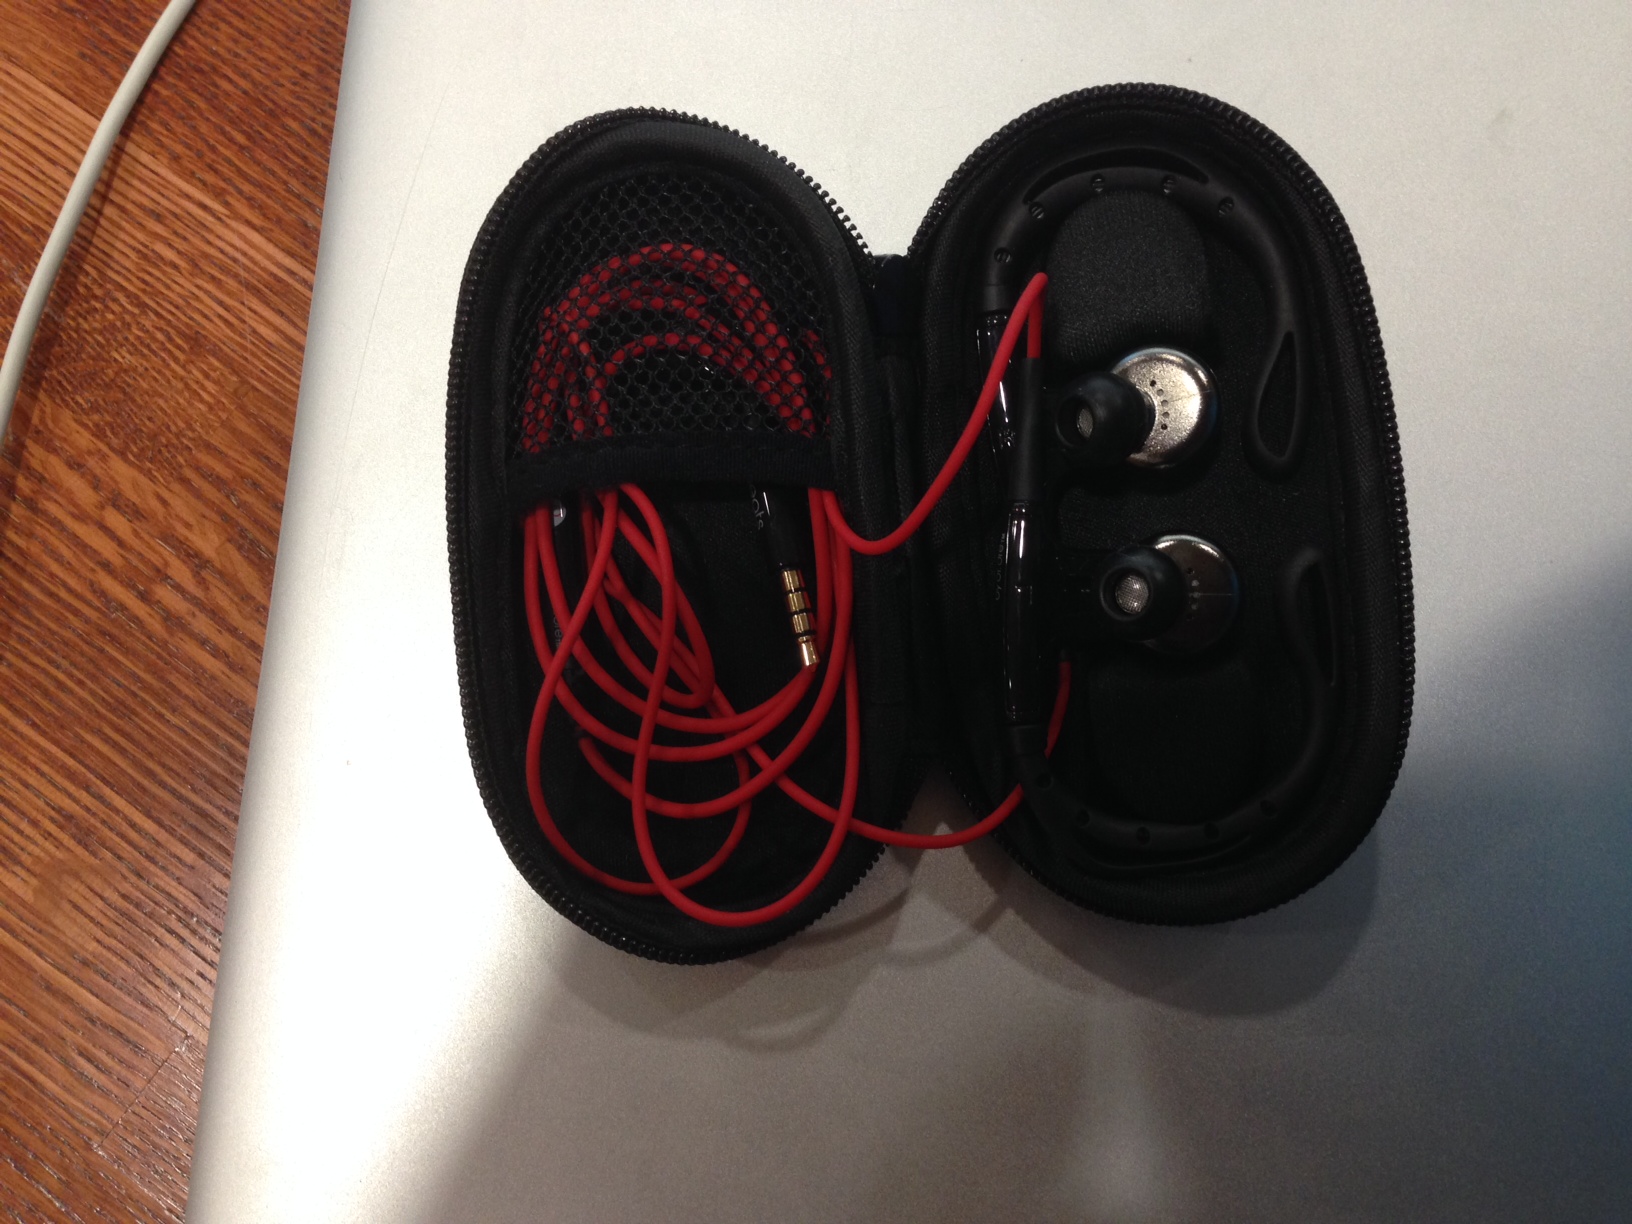 how to put powerbeats in case